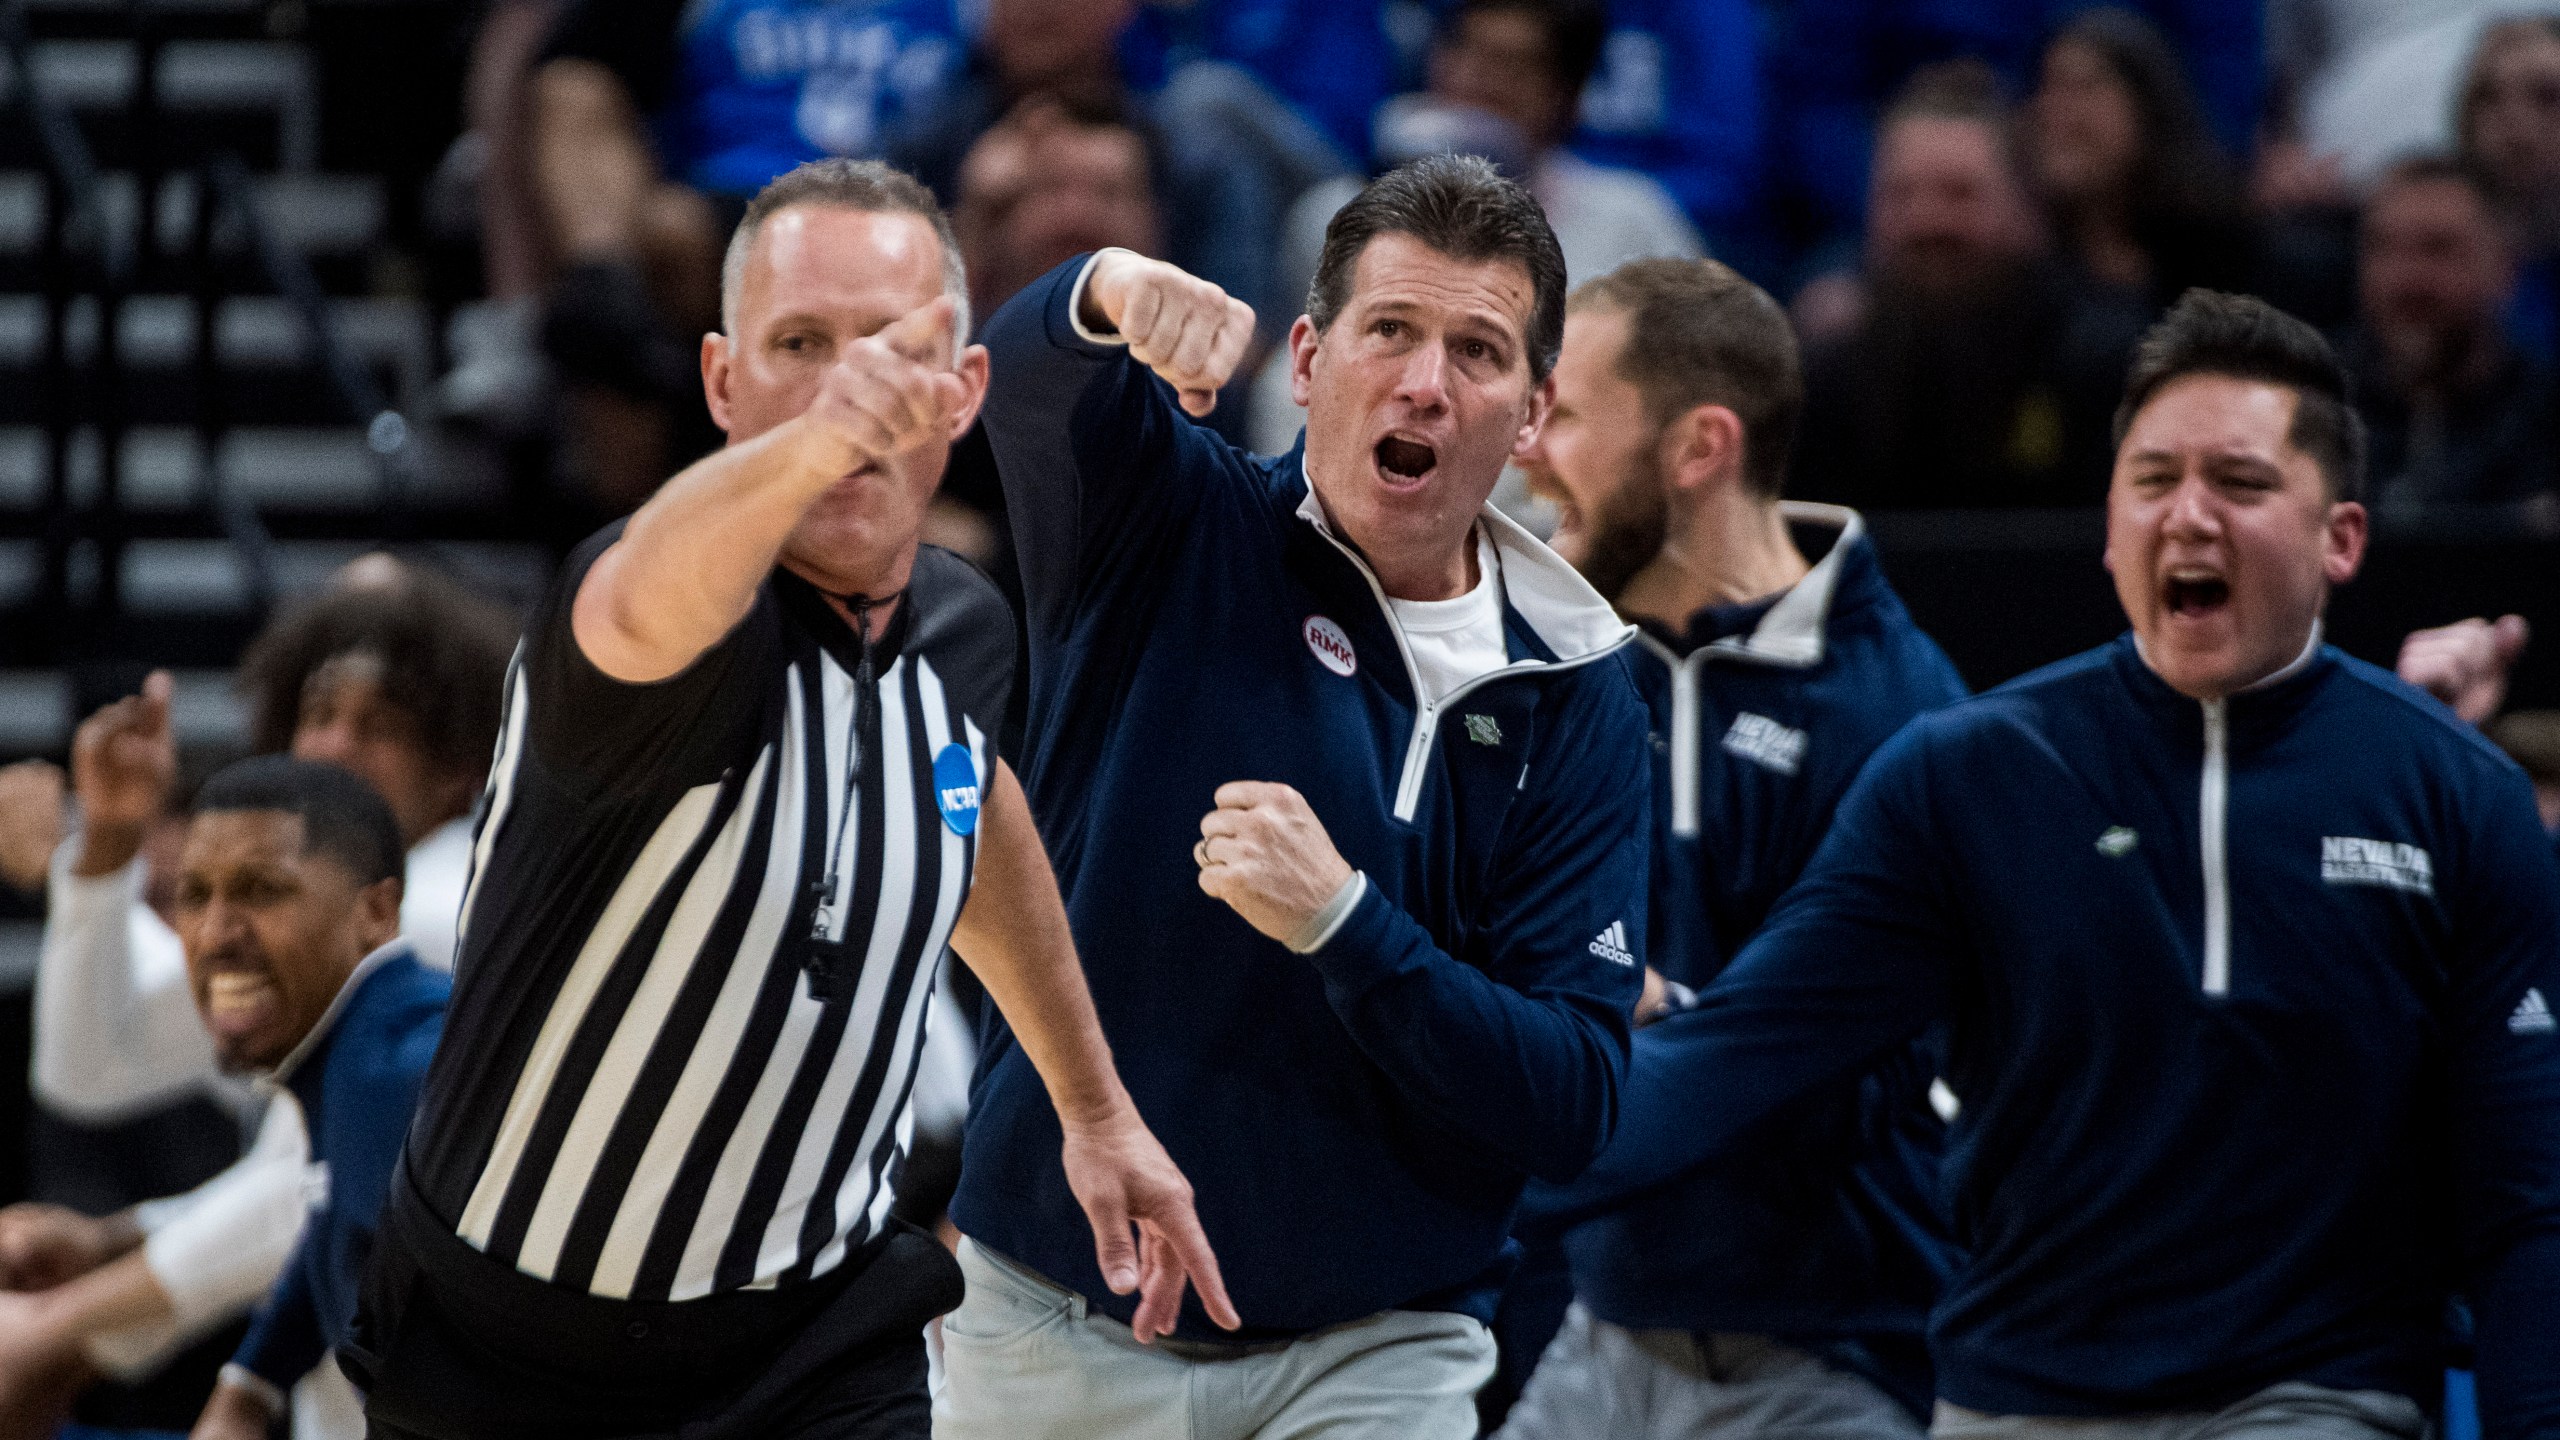 Nevada head coach Steve Alford, center, reacts after a call against Dayton during the first half of a first-round college basketball game in the NCAA Tournament in Salt Lake City, Thursday, March 21, 2024. (AP Photo/Isaac Hale)